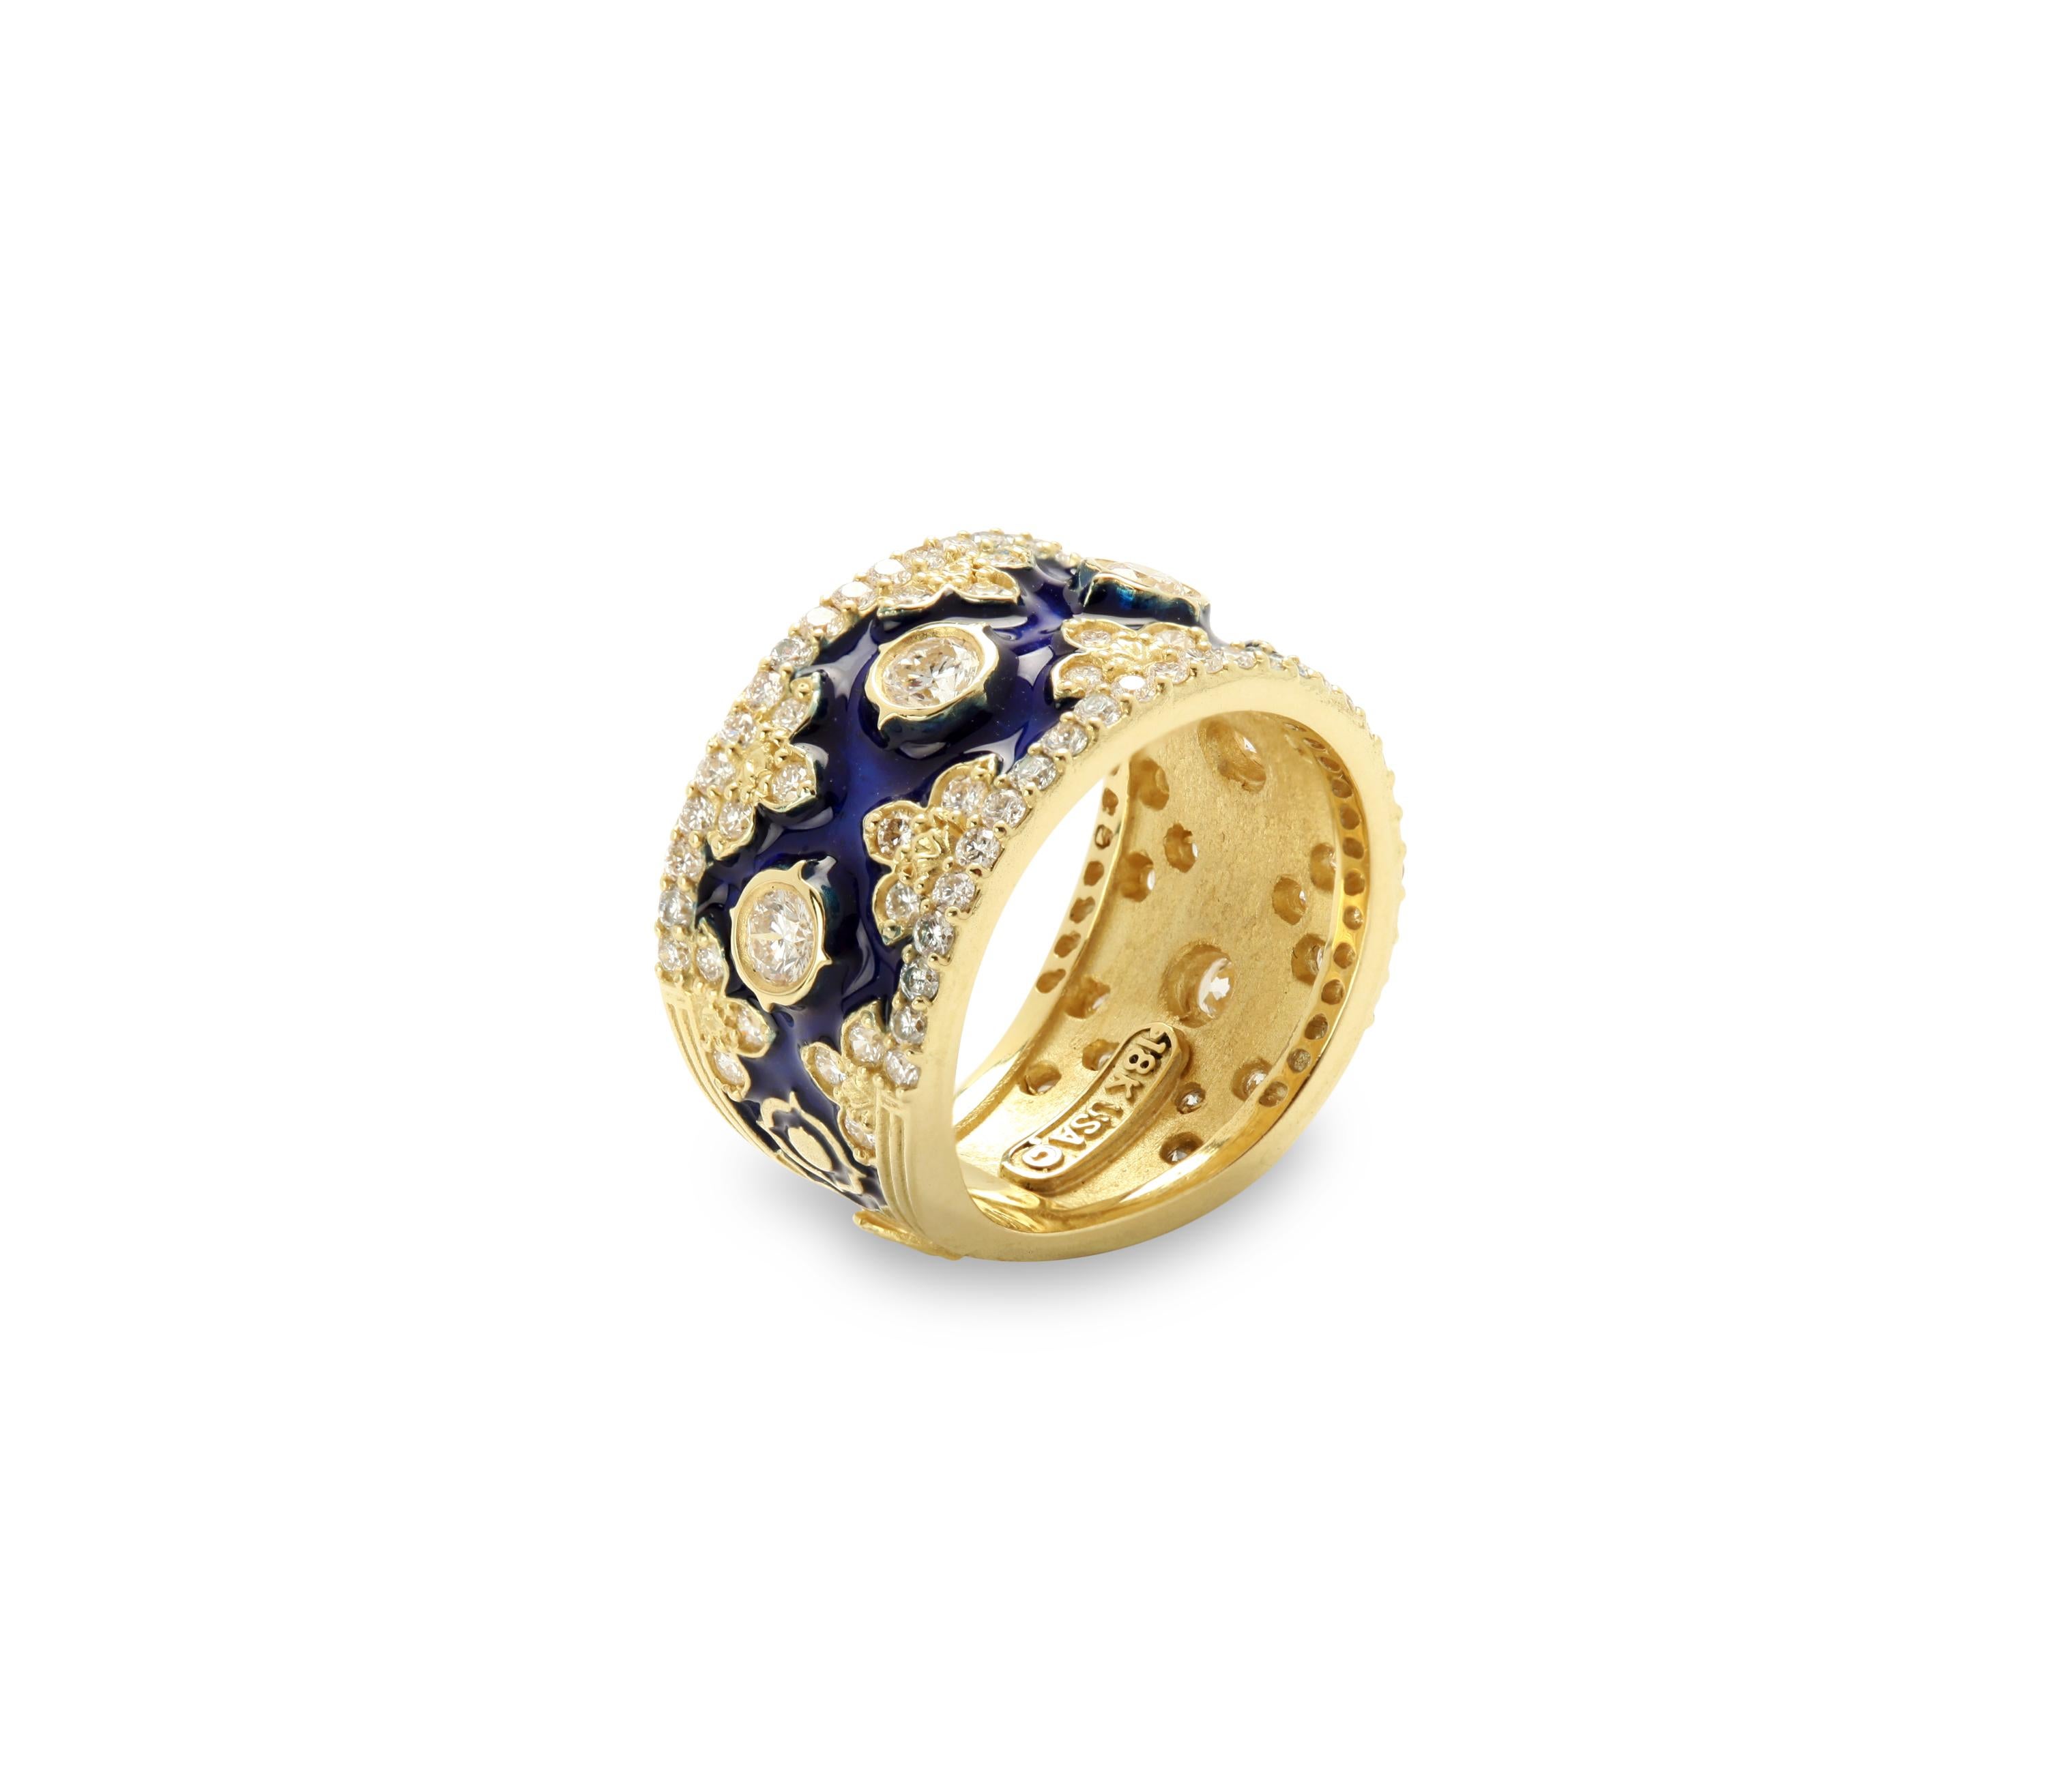 IF YOU ARE REALLY INTERESTED, CONTACT US WITH ANY REASONABLE OFFER. WE WILL TRY OUR BEST TO MAKE YOU HAPPY!

18K Yellow Gold and Diamond Band Ring with Cobalt Blue Enamel by Stambolian

2.03 carat G color, VS clarity white diamonds

Cobalt blue